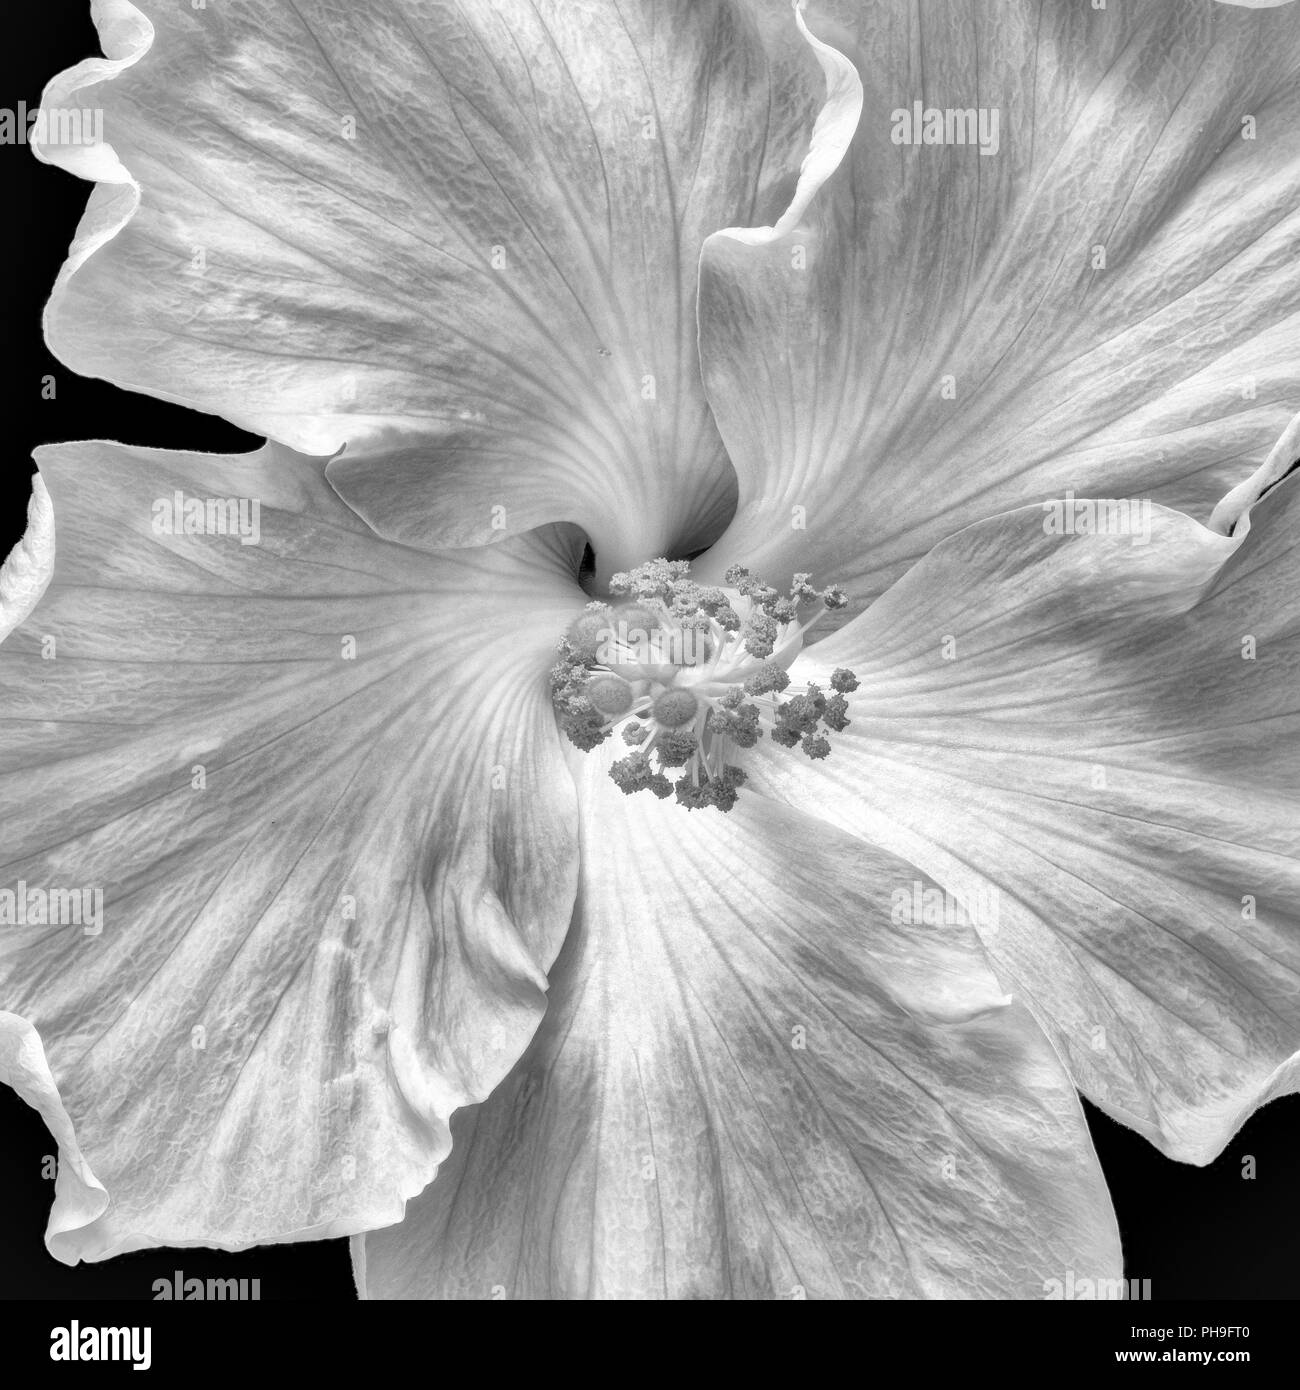 Fine art still life floral monochrome macro flower photography of a single isolated blooming white wide open hibiscus blossom on black background Stock Photo